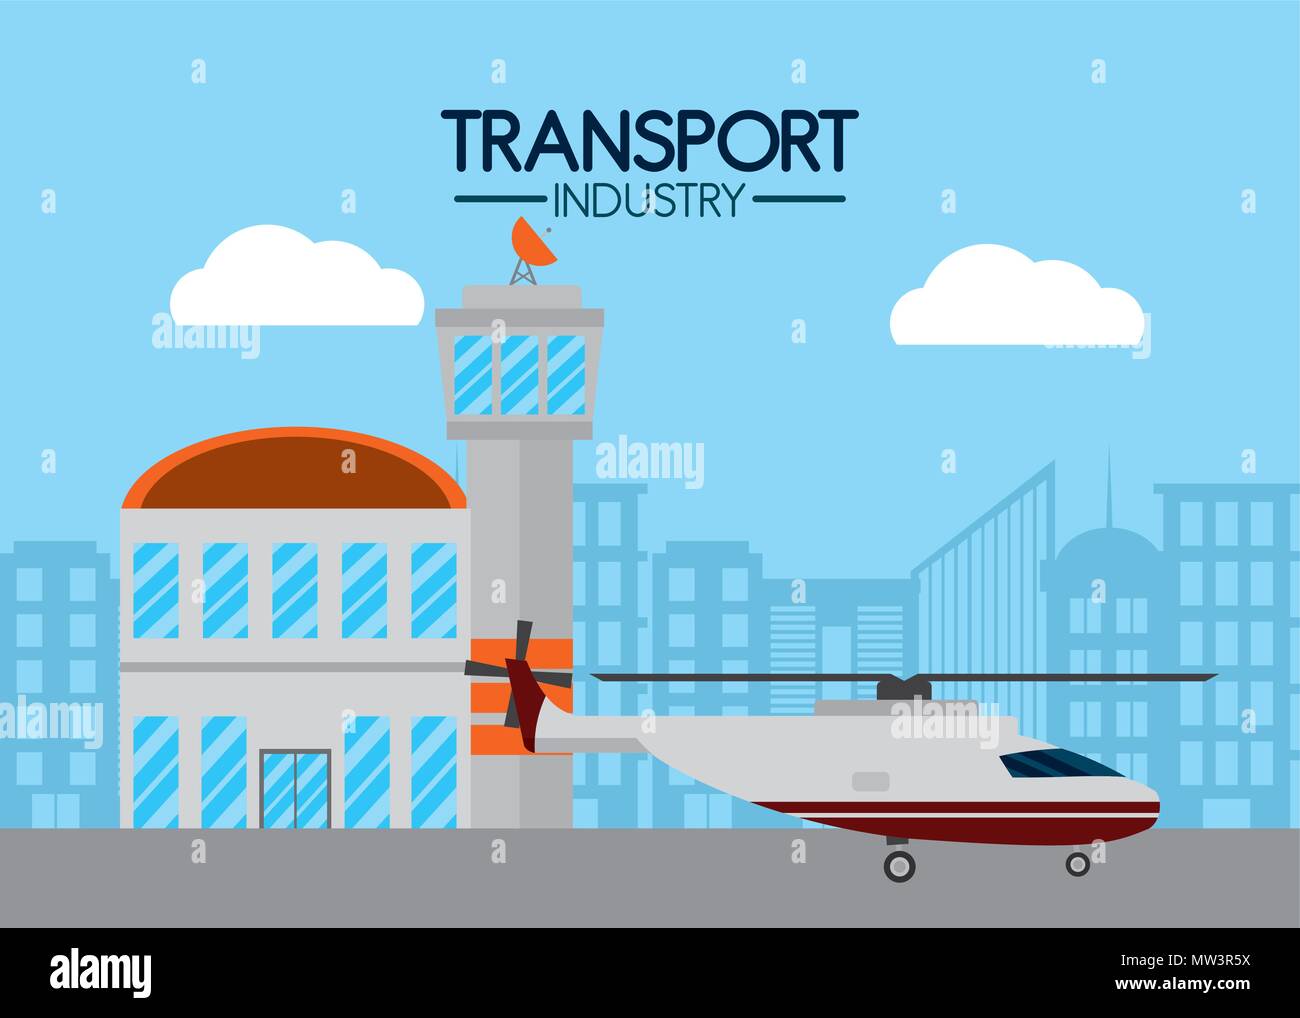 Heavy load helicopter Stock Vector Images - Alamy